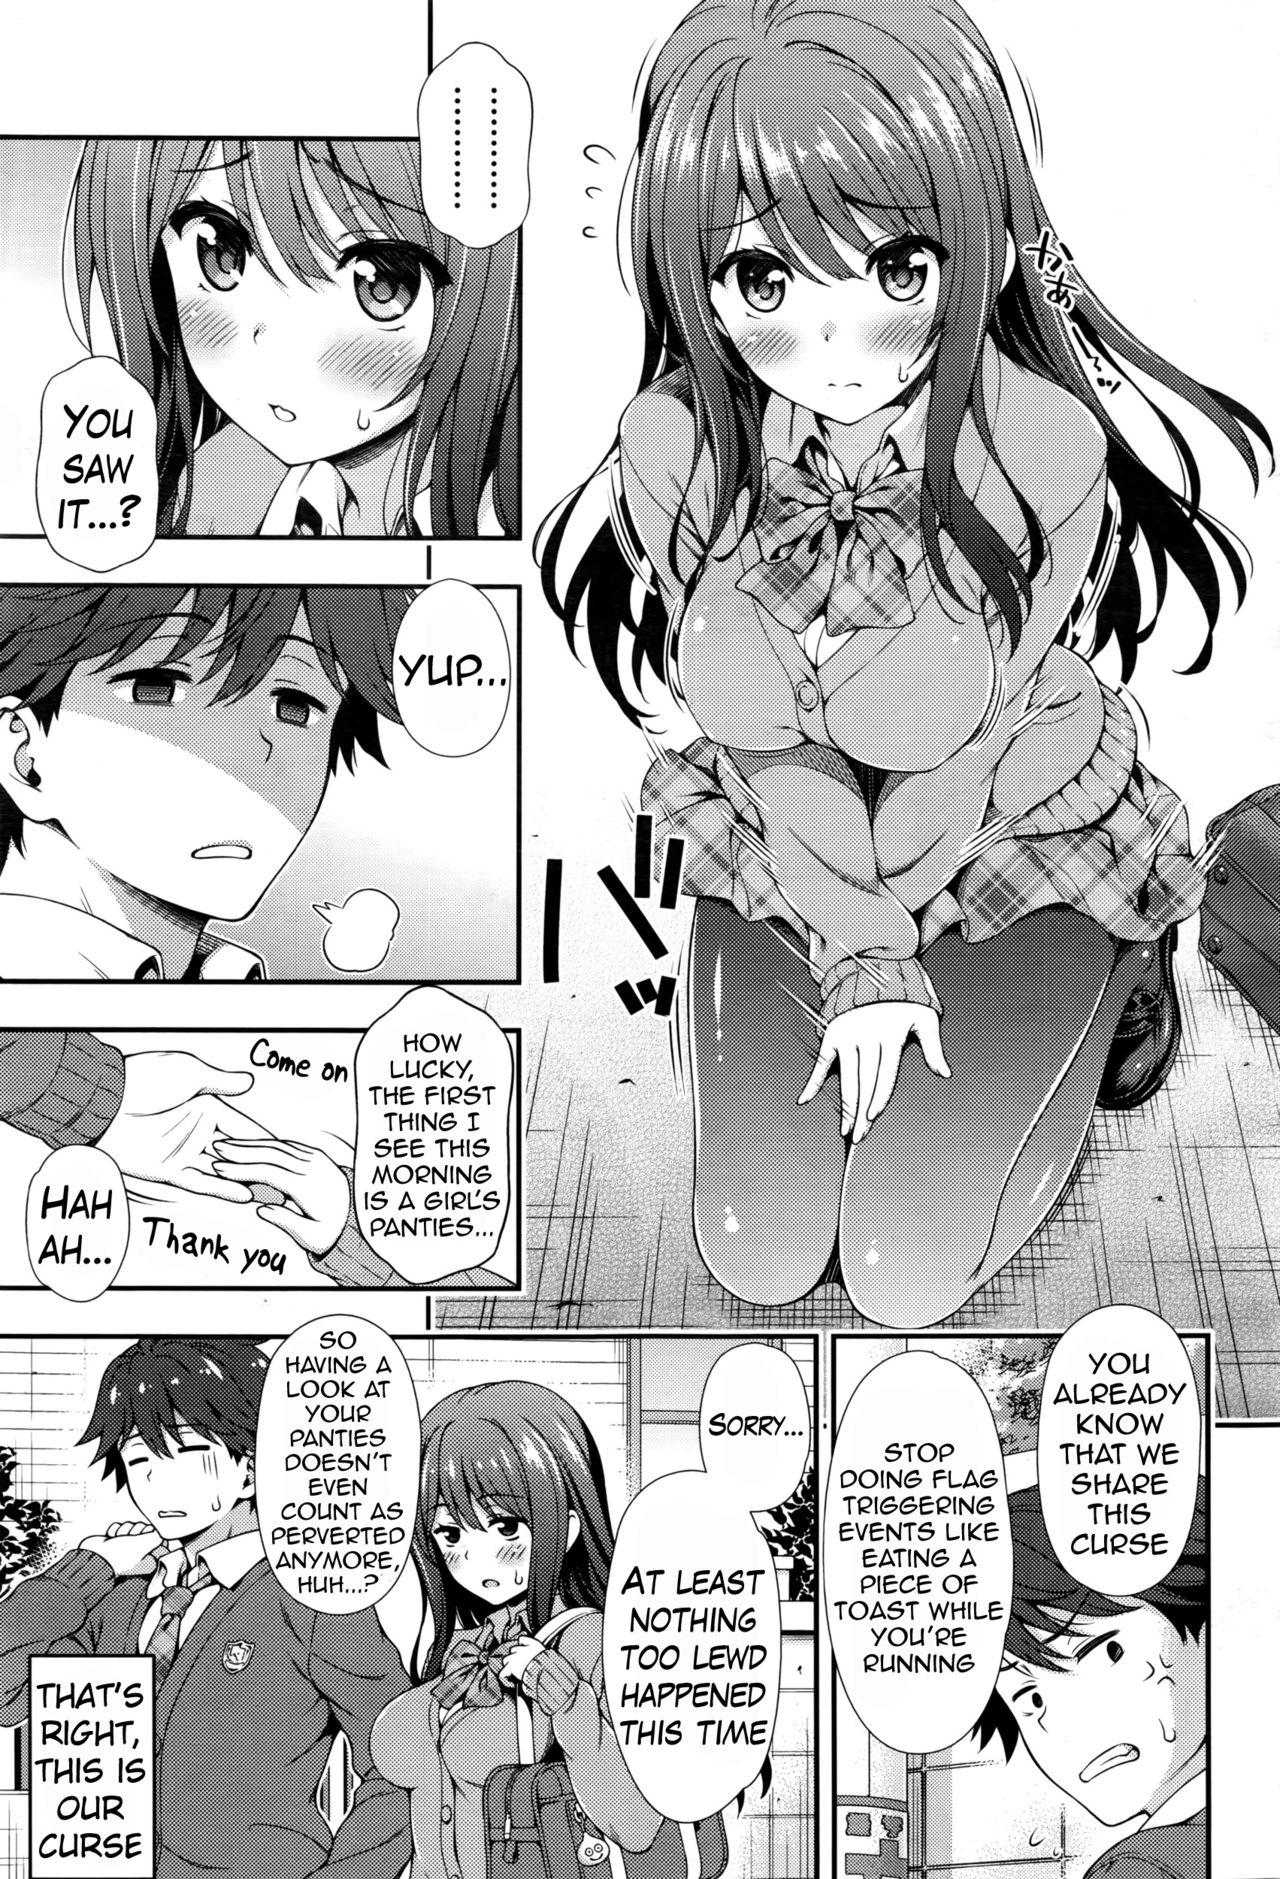 Gapes Gaping Asshole Akai Ito no Noroi | The Red String's Curse Uncensored - Page 3